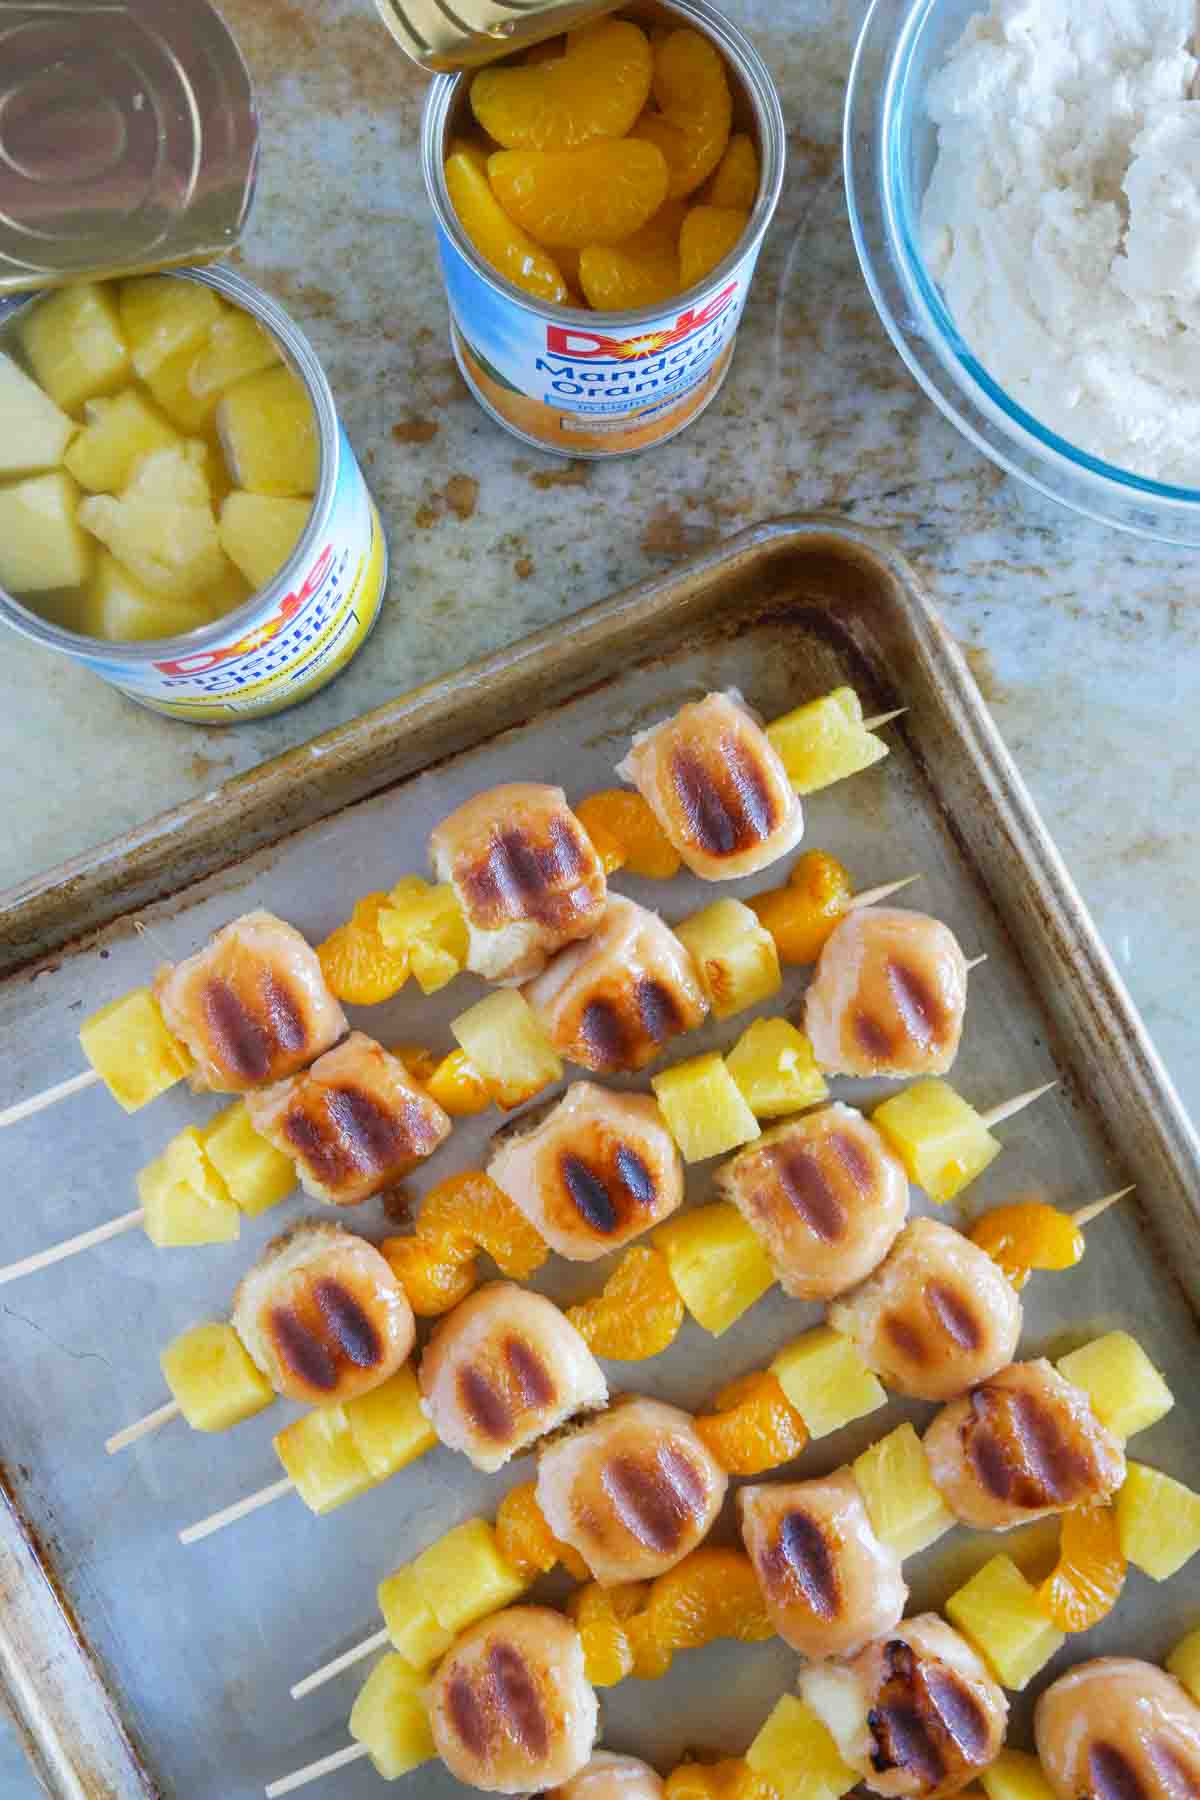 Donut Kabobs with pineapple and oranges that have been grilled